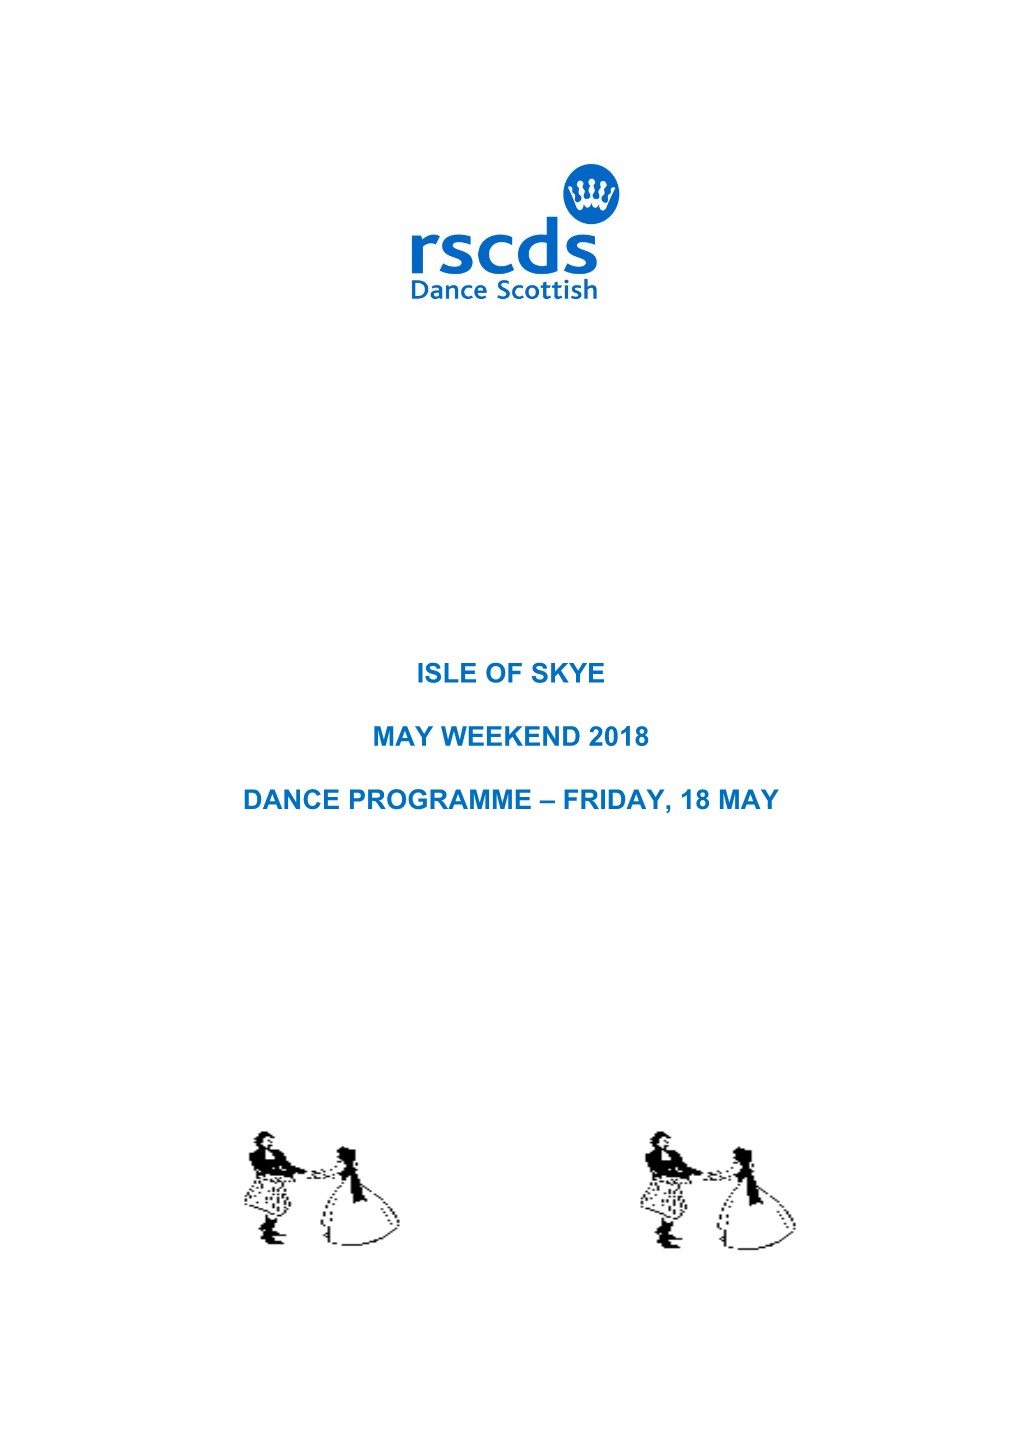 Dance Programme Friday, 18 May